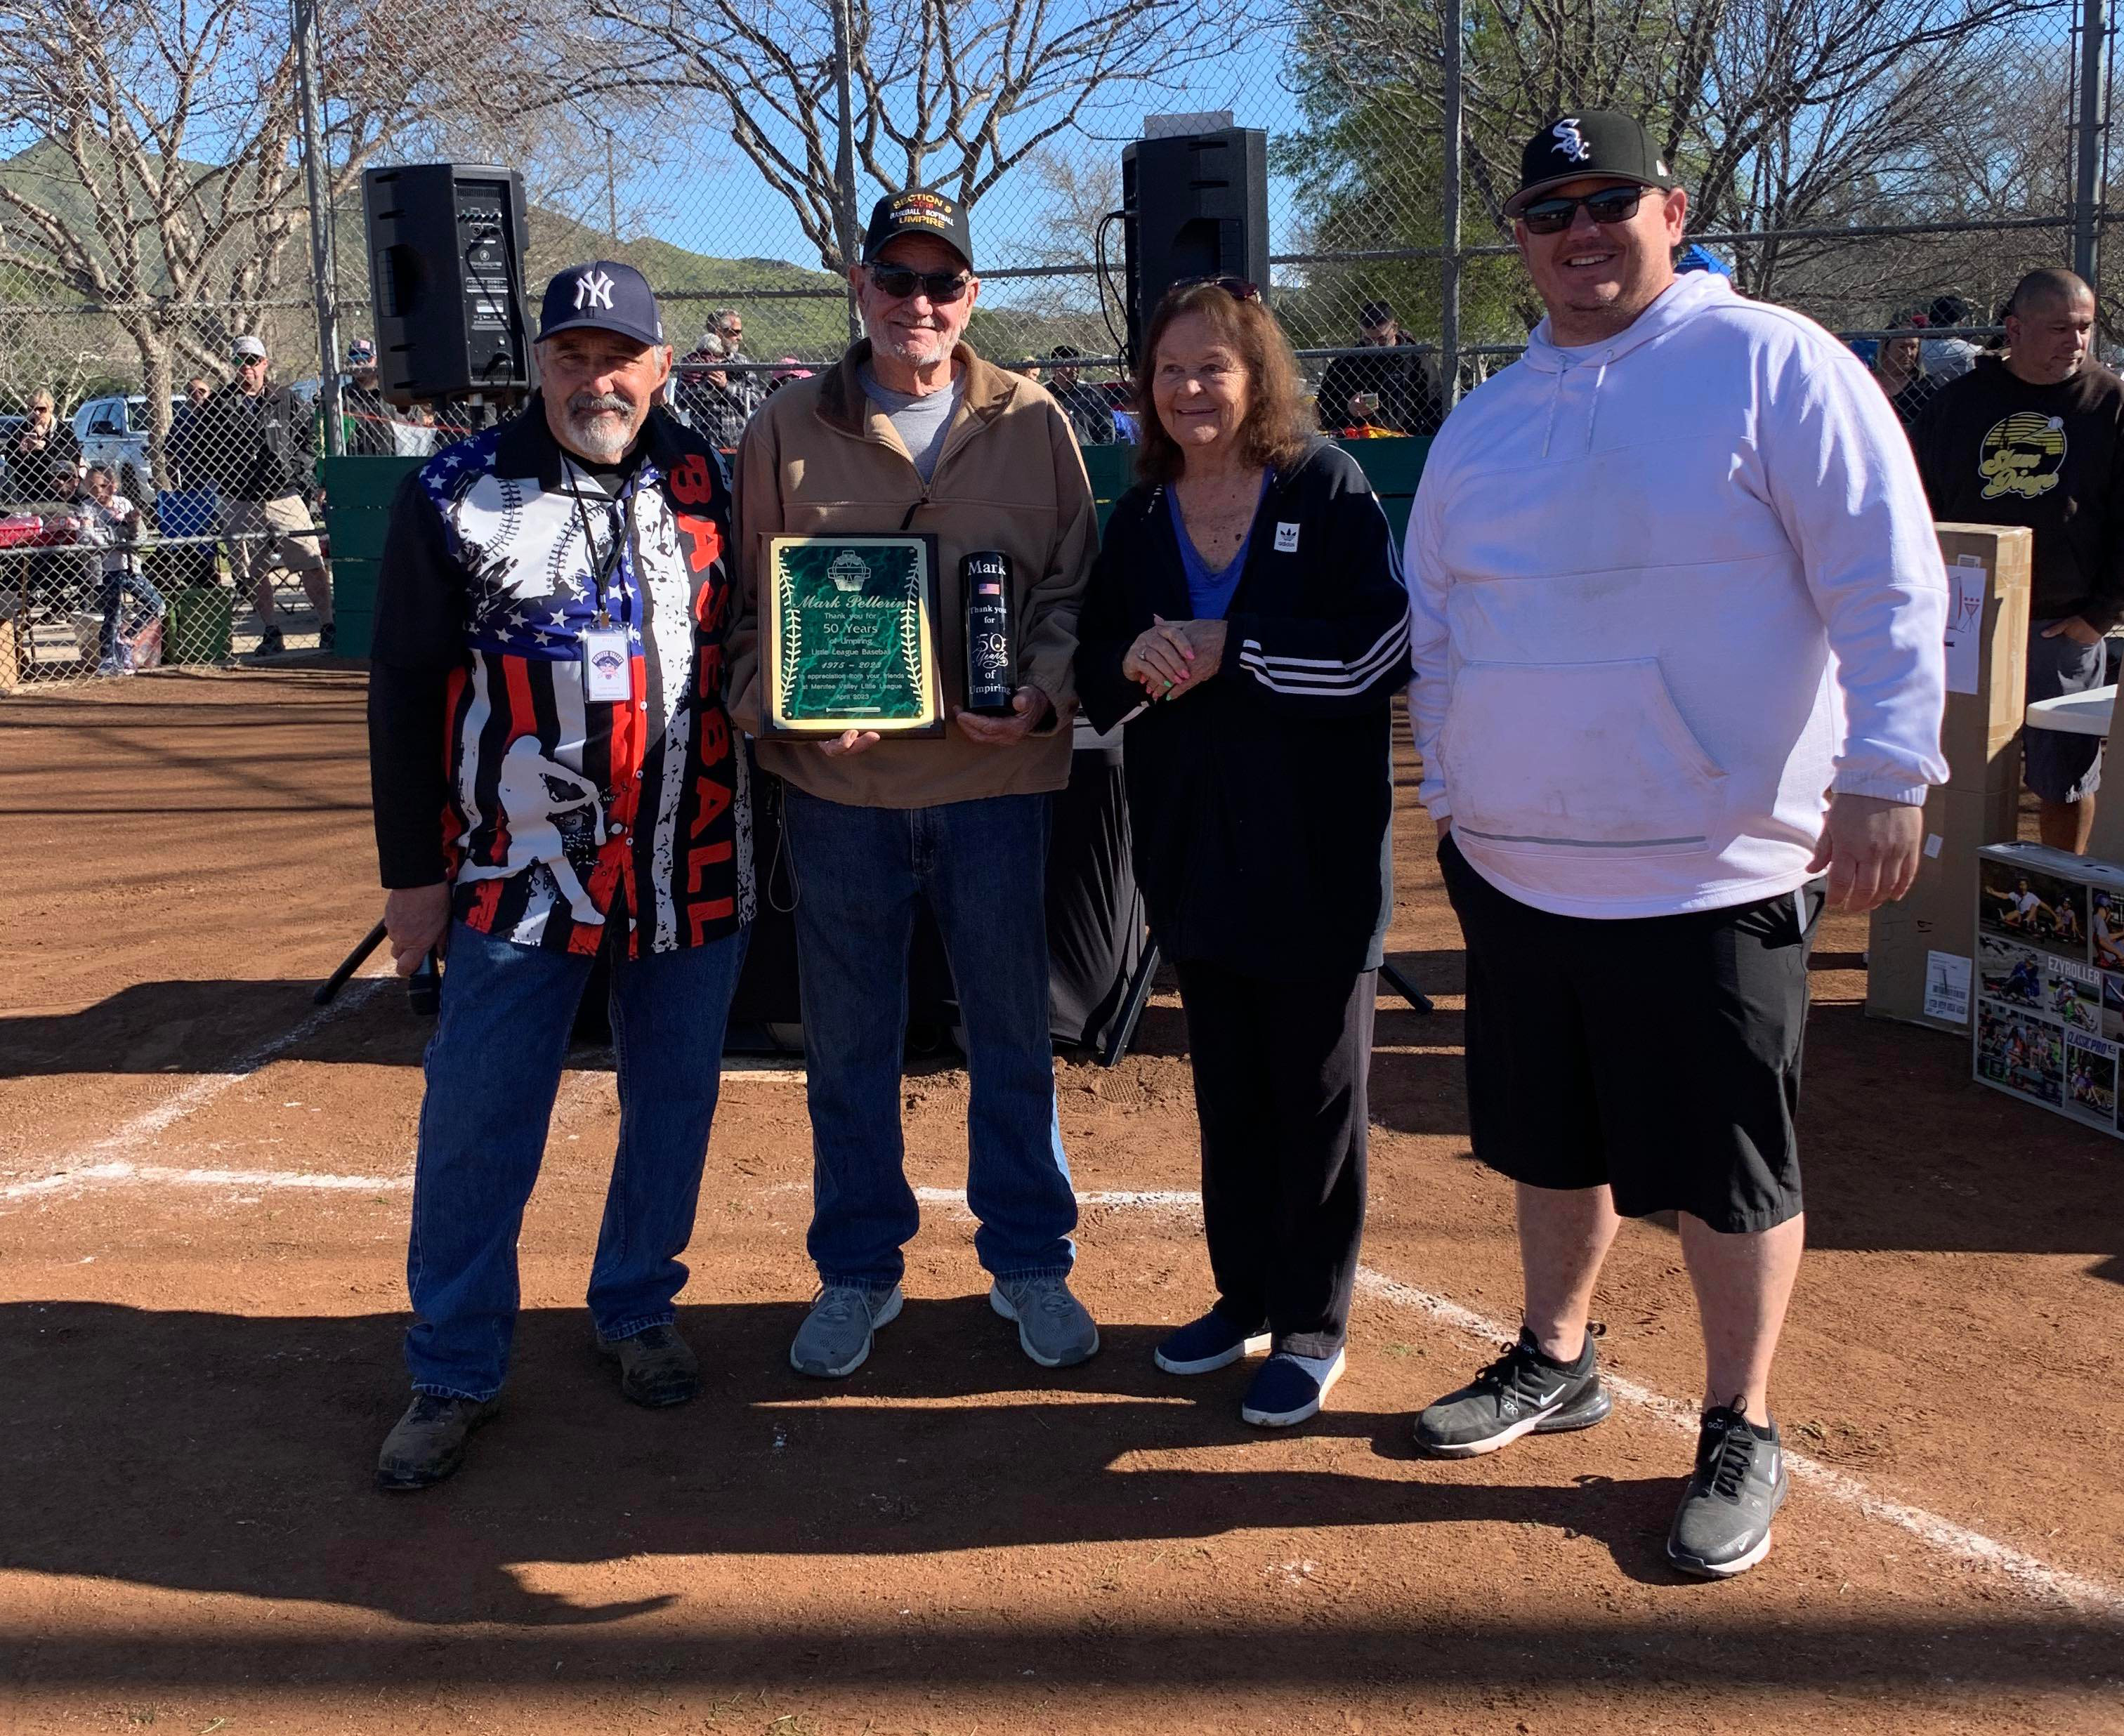 Longtime umpire honored on Little Leagues Opening Day Menifee 24/7 image